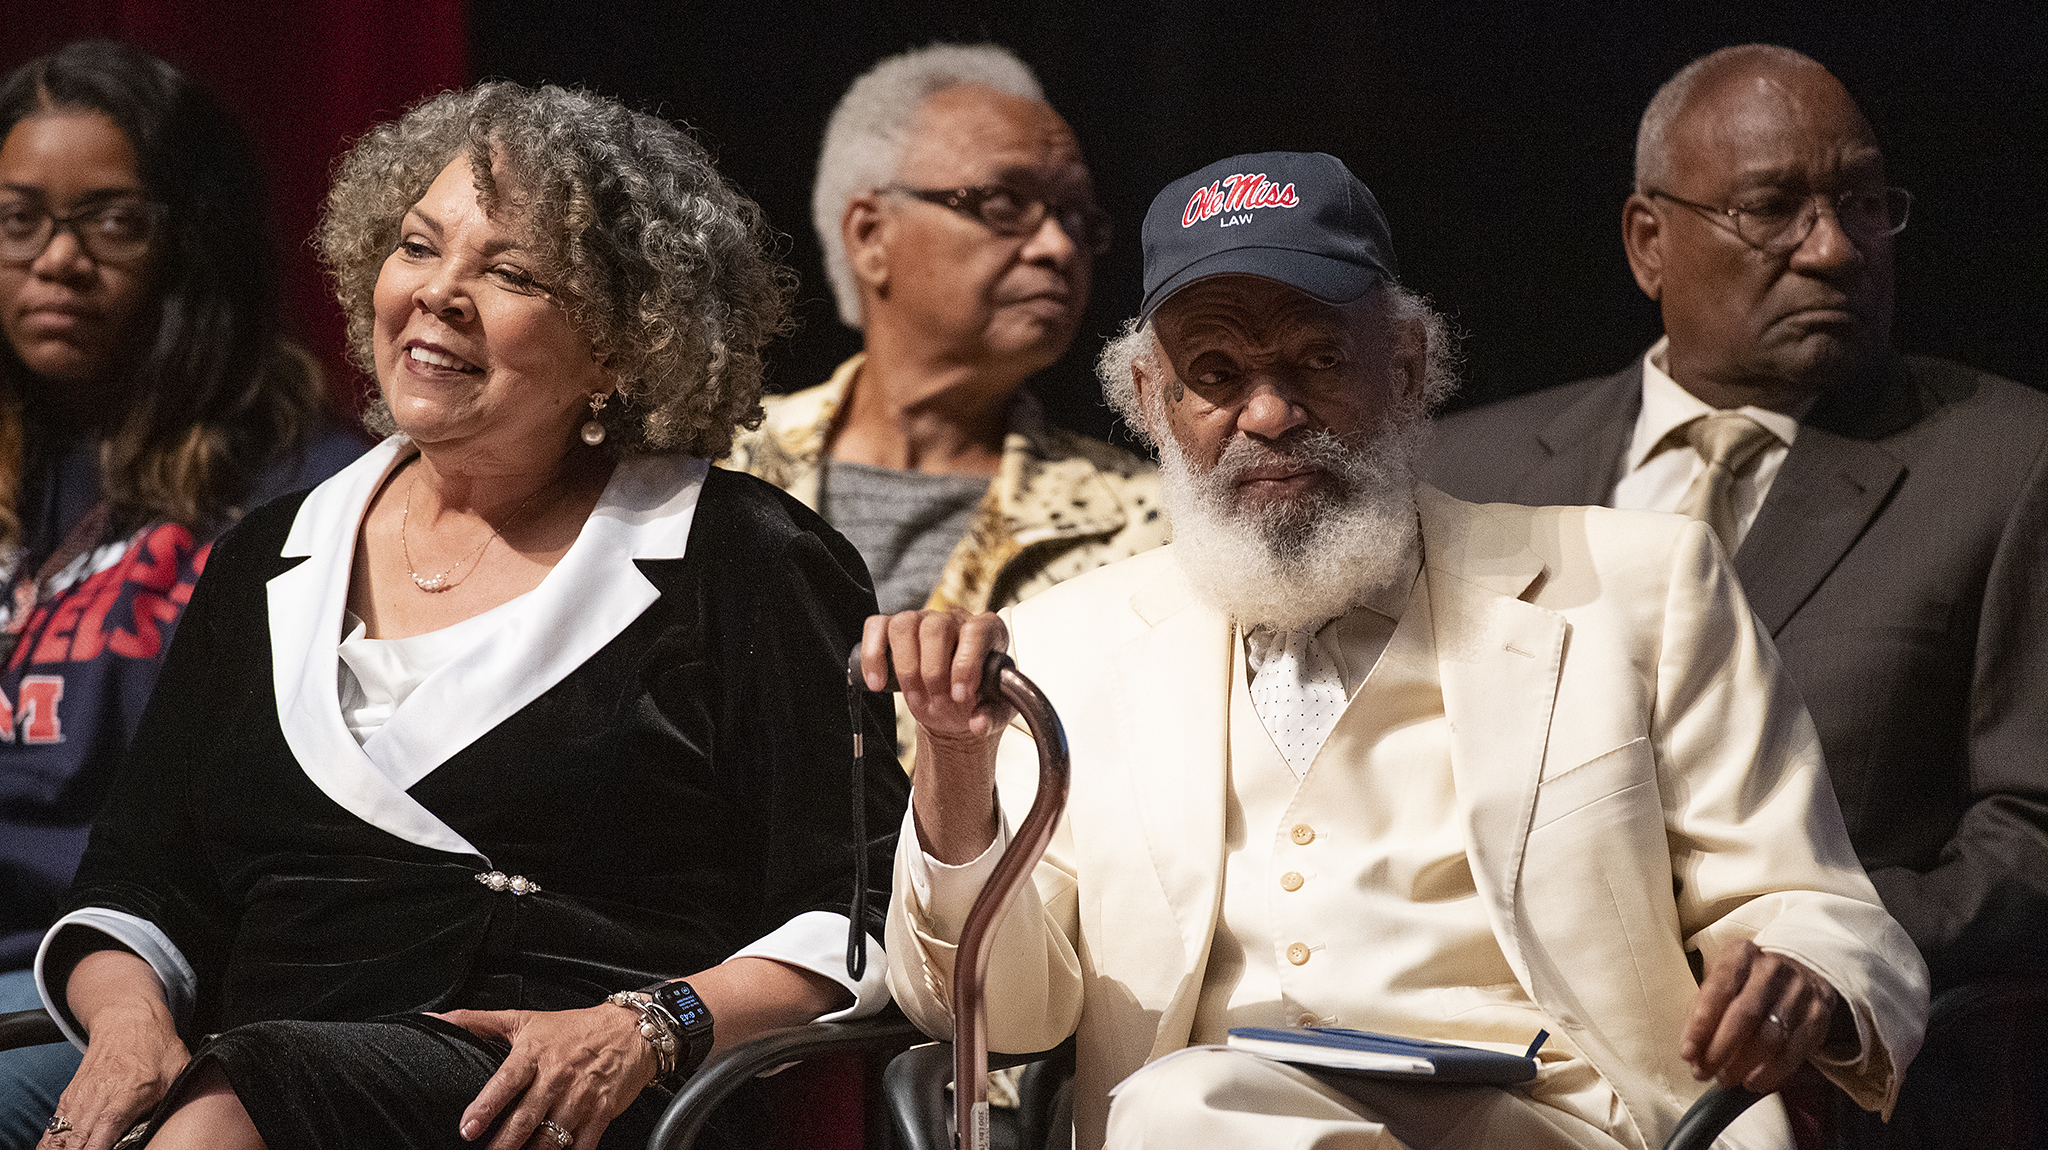 Judy (left) and James Meredith watch the proceedings of the ‘The Mission Continues: Building Upon the Legacy’ keynote event during the university’s celebration of 60 years of integration. Judy Meredith will give this year’s Black History Month keynote address and present her documentary, ‘Who is James Meredith?’ on Feb. 16. Photo by Thomas Graning/Ole Miss Digital Imaging Services